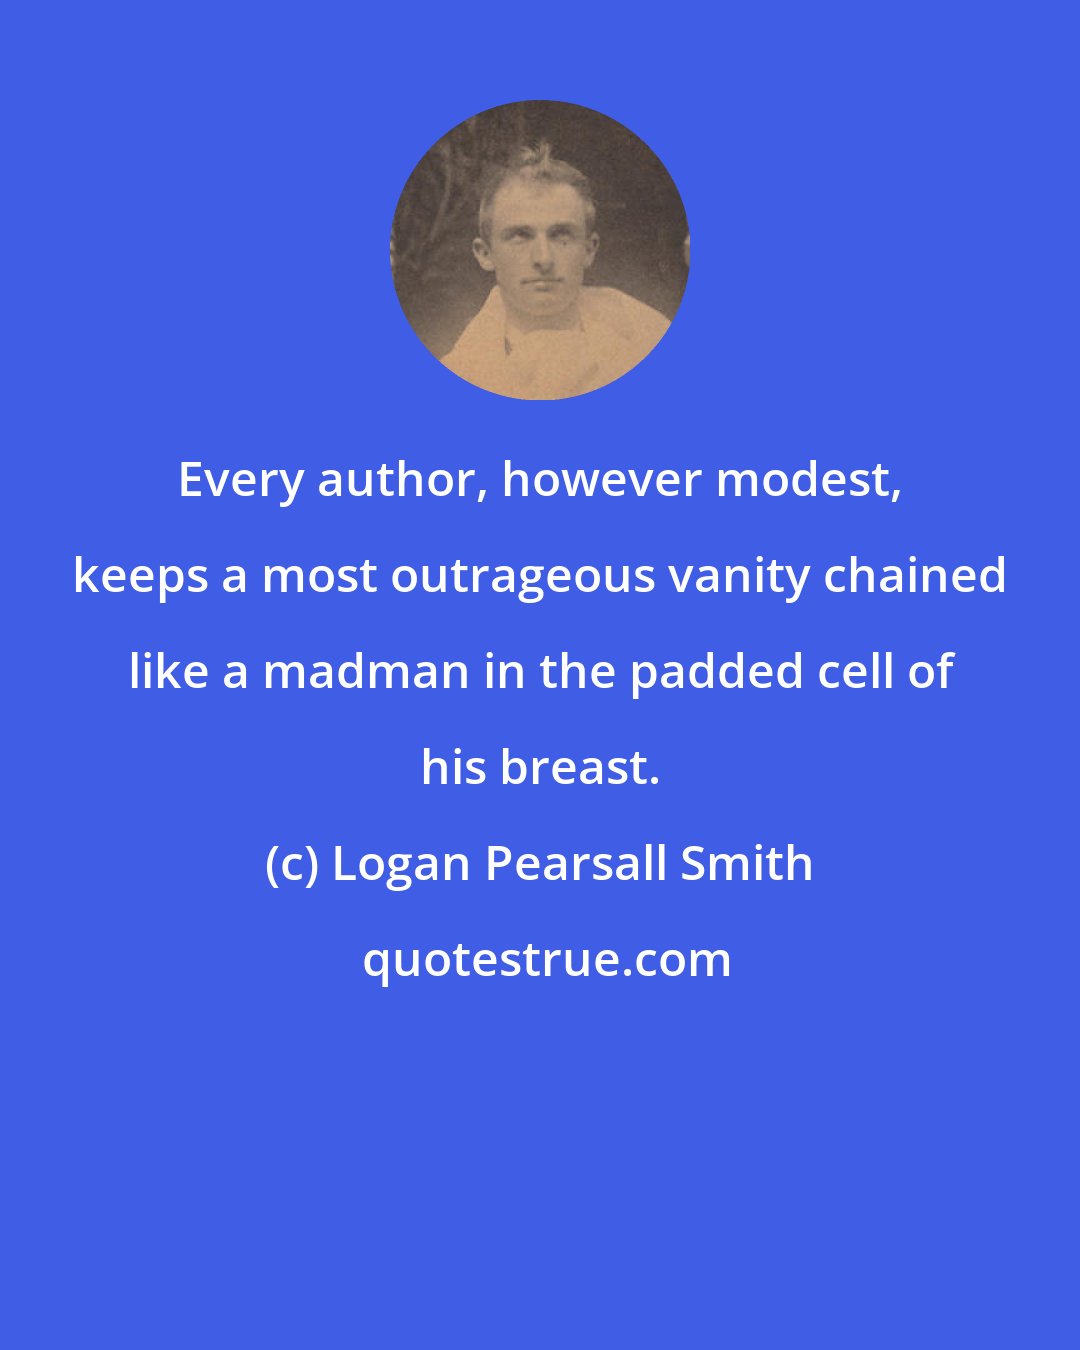 Logan Pearsall Smith: Every author, however modest, keeps a most outrageous vanity chained like a madman in the padded cell of his breast.